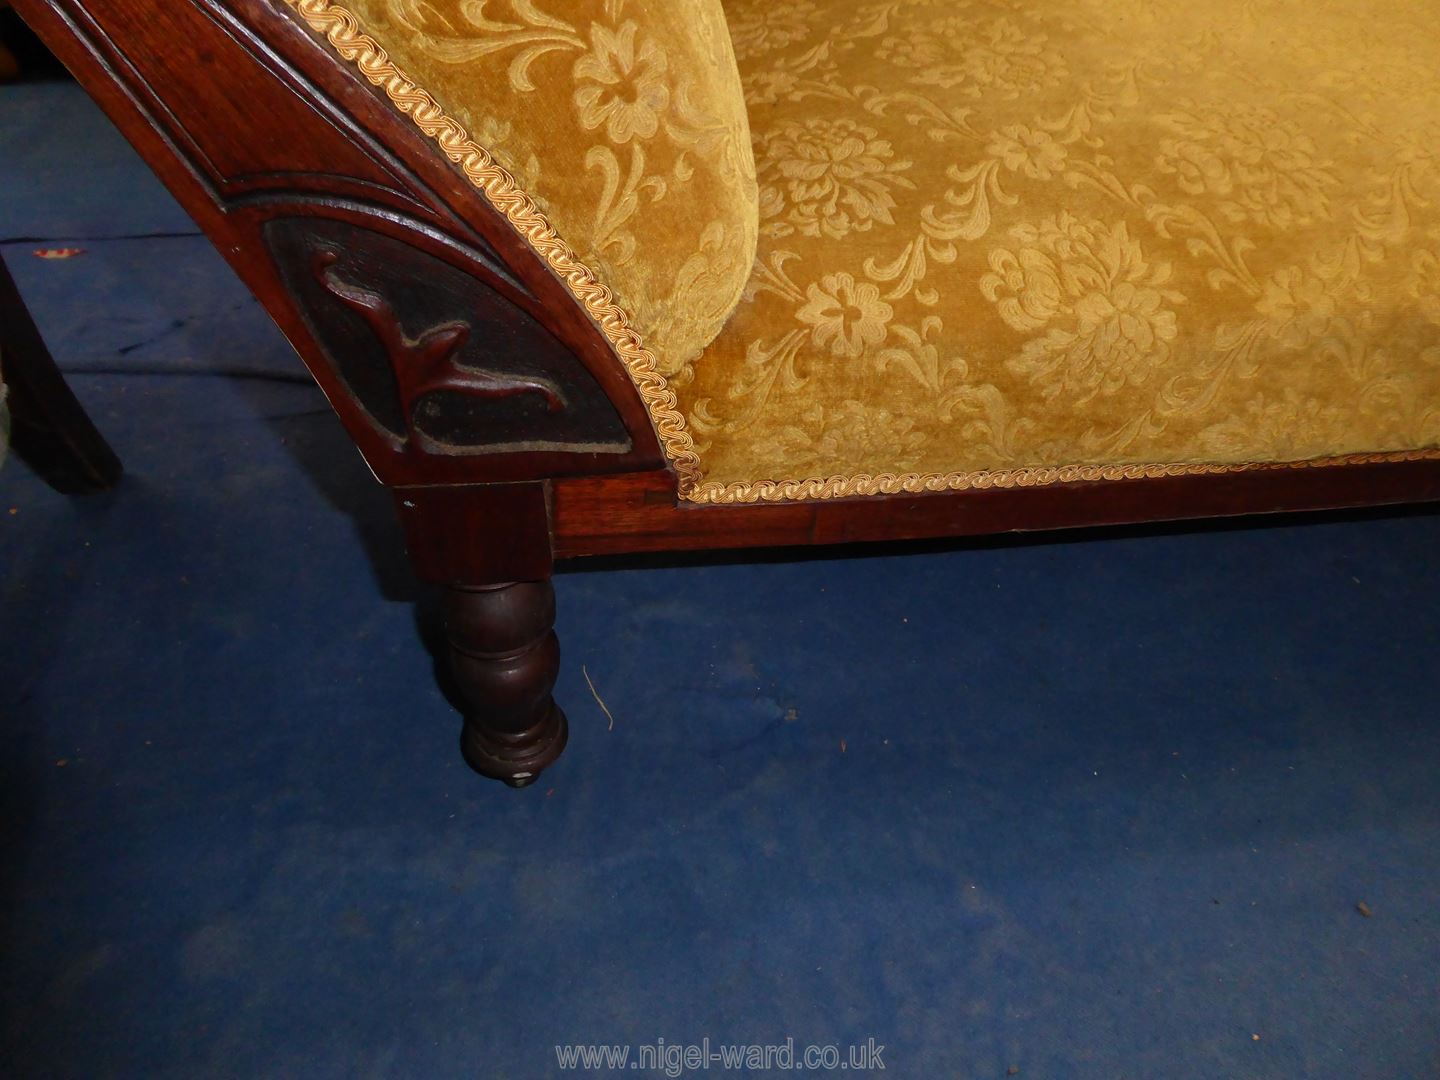 A circa 1900 Chaise Longue standing on turned legs and upholstered in brown/gold coloured shadow - Image 5 of 5